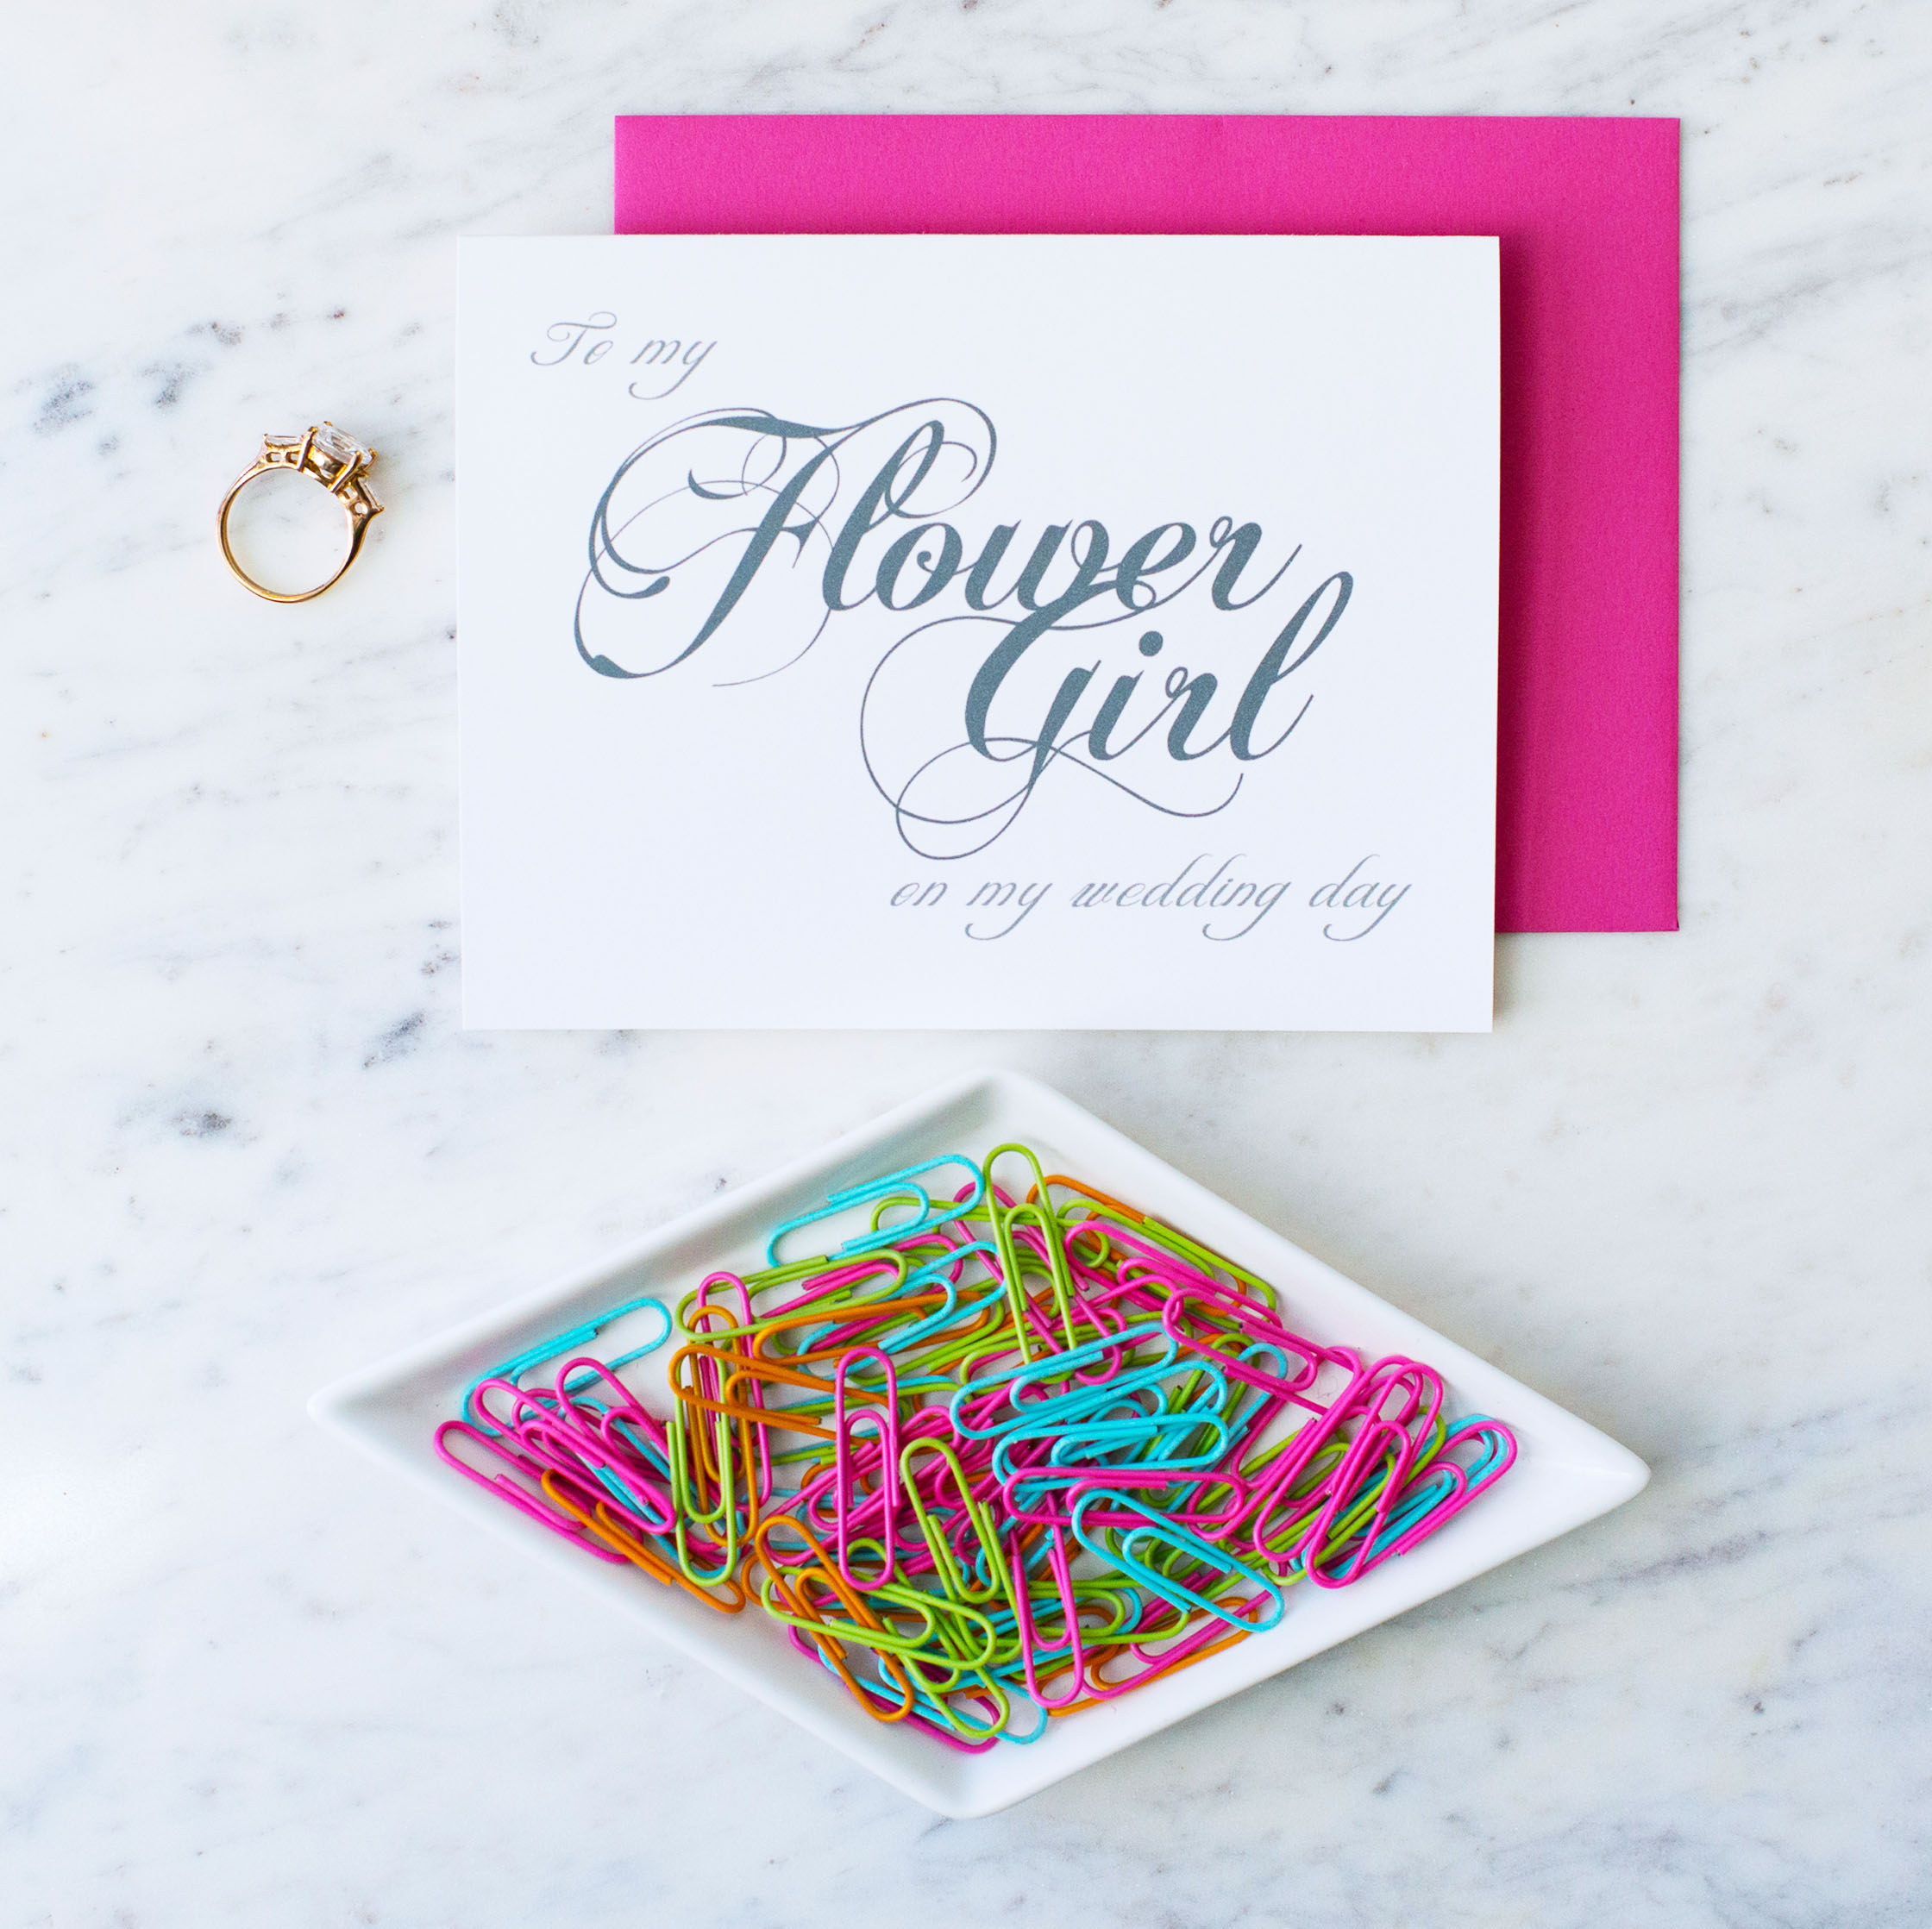 Squarespace Name and Note.jpgEnvelope Colors.jpg Squarespace Main Photo.jpgSquarespace Name and Note.jpgEnvelope Colors.jpg To My Flower Girl On My Wedding Day Card